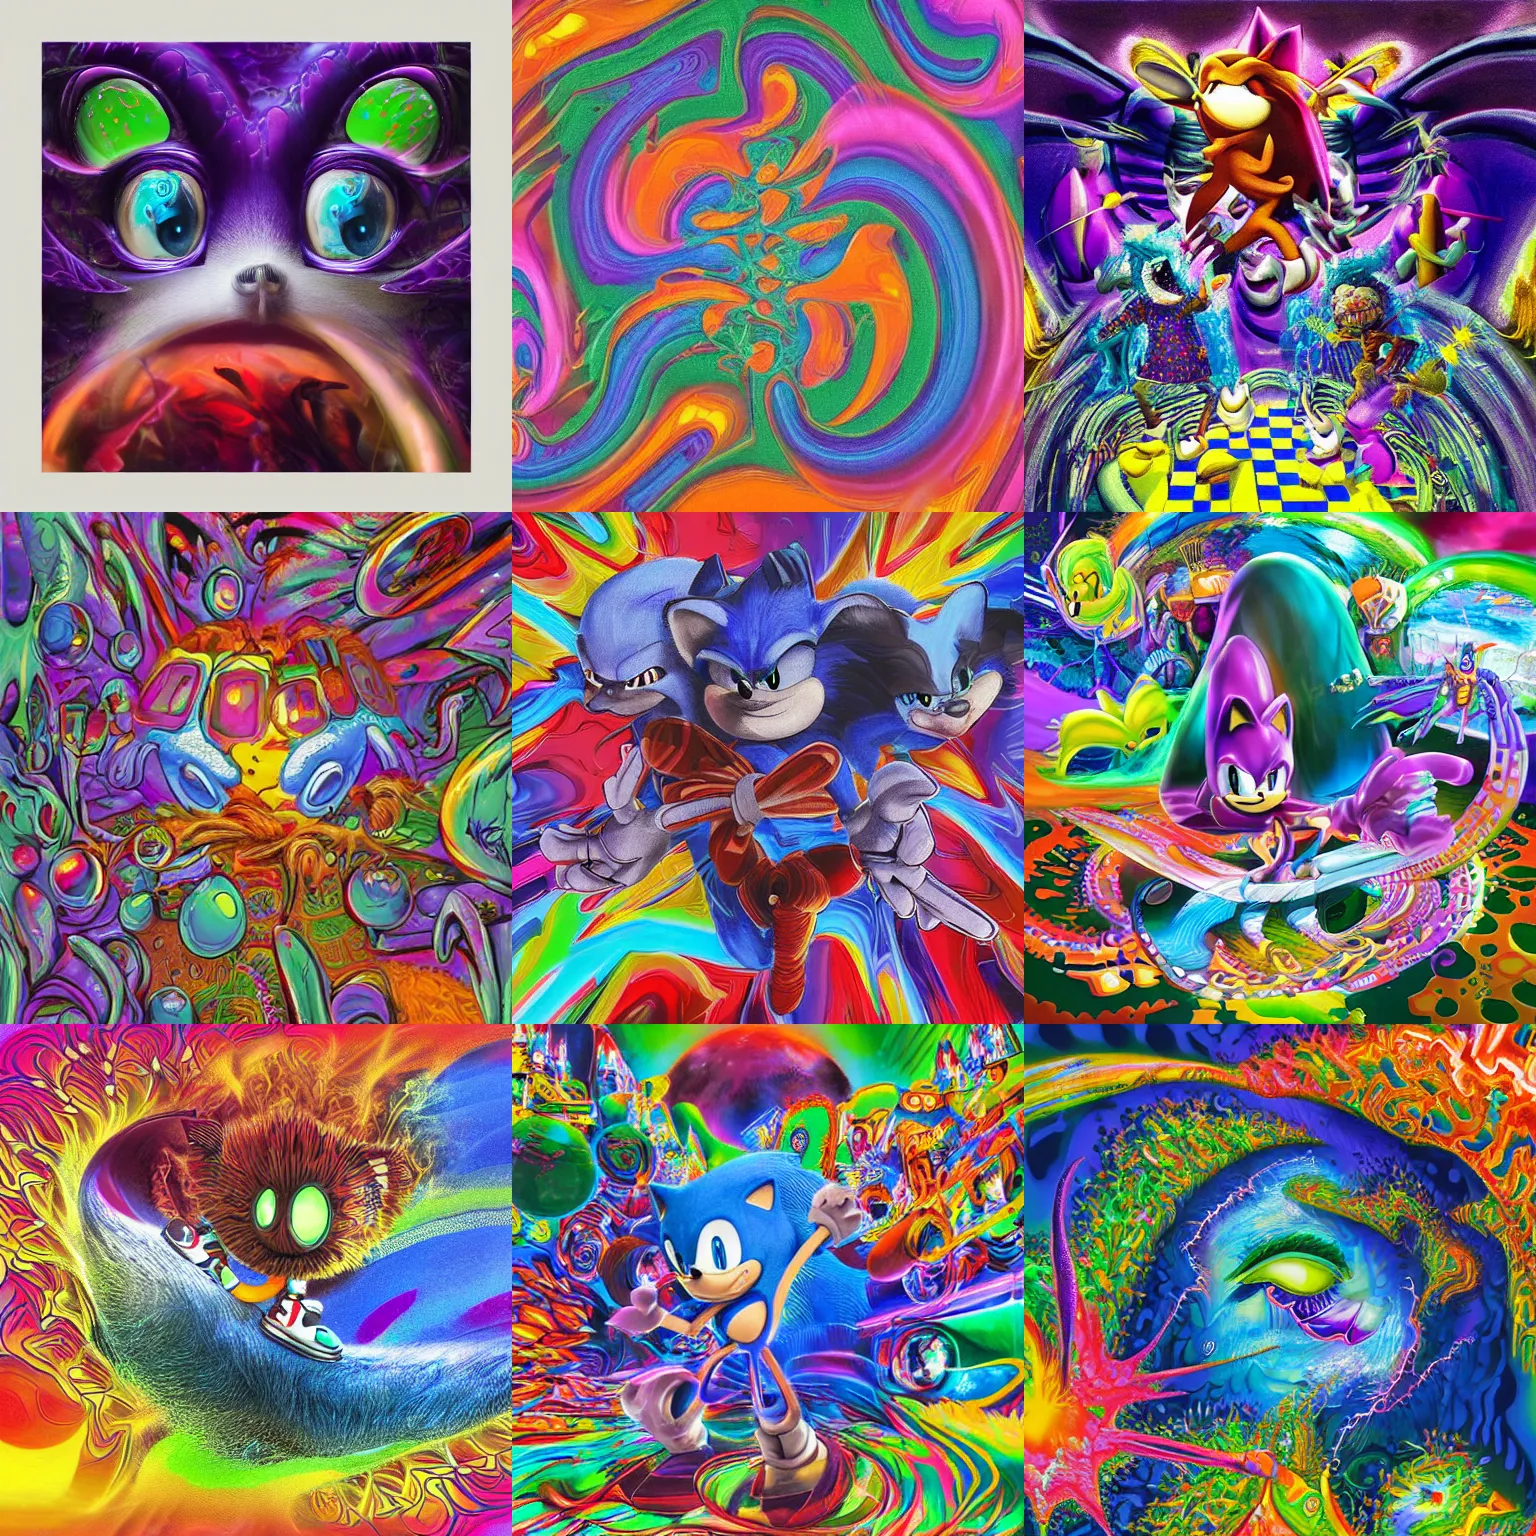 Prompt: classic sonic in surreal, fractal, detailed professional, high quality portrait airbrush art tame impala shpongle mgmt album cover portrait of a liquid dissolving LSD DMT sonic the hedgehog surfing through cyberspace, purple checkerboard background, 1990s 1992 Sega Genesis video game album cover